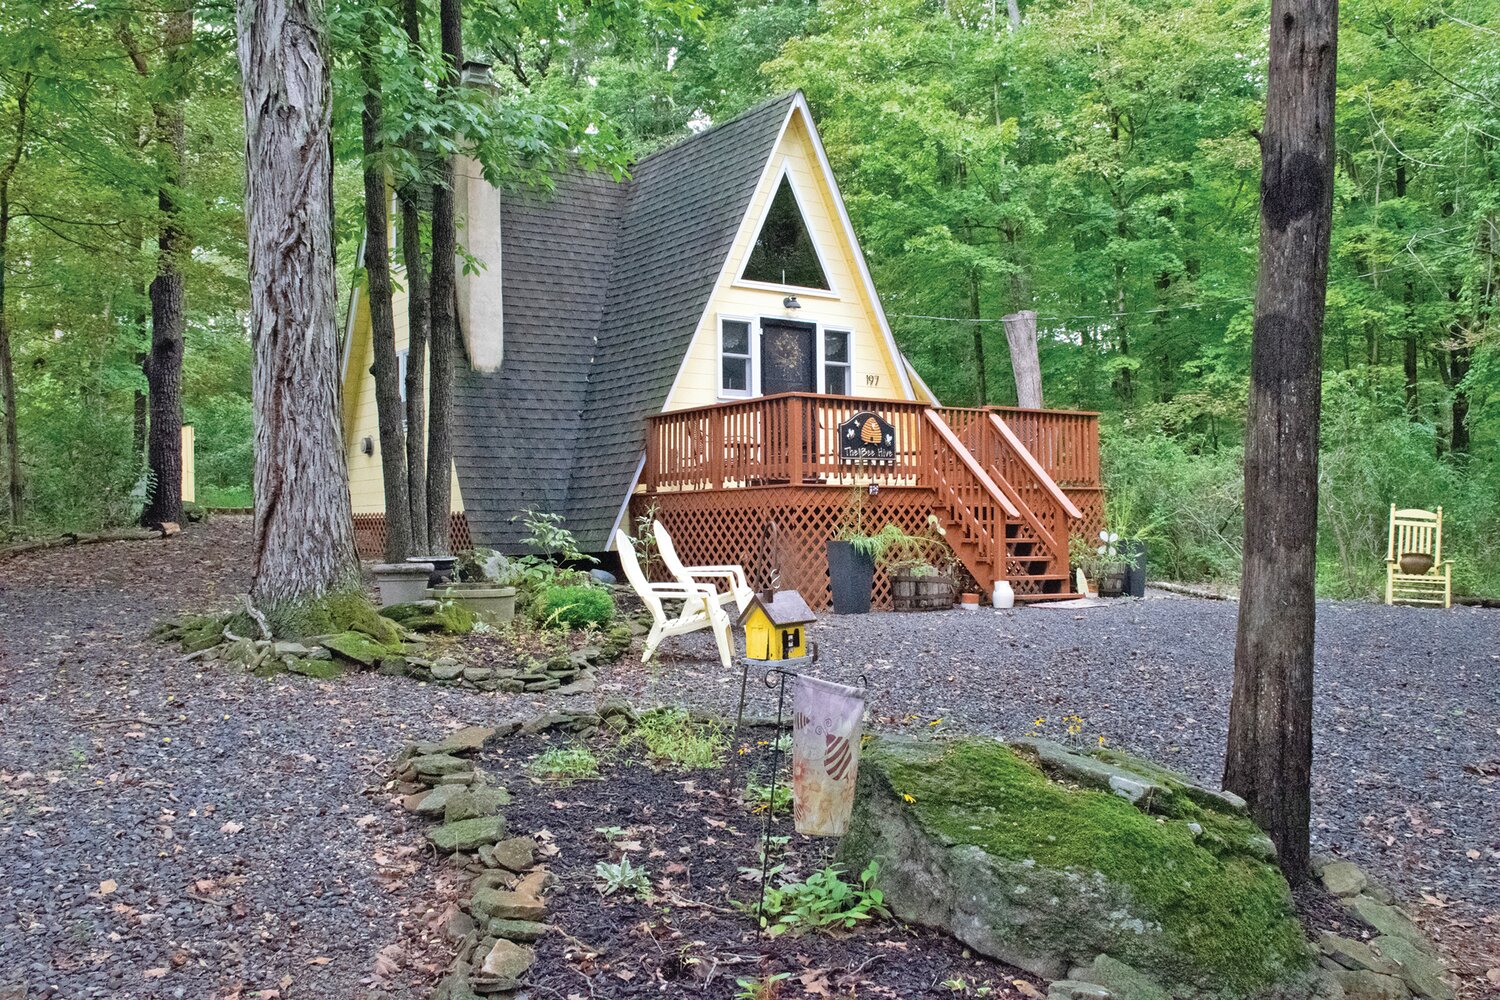 Schnabels’ Woods sits on 137 acres in Haycock Township. It’s dotted with little cottages and cabins popular among those for whom “vacation” means an opportunity to enjoy some peace and quiet.